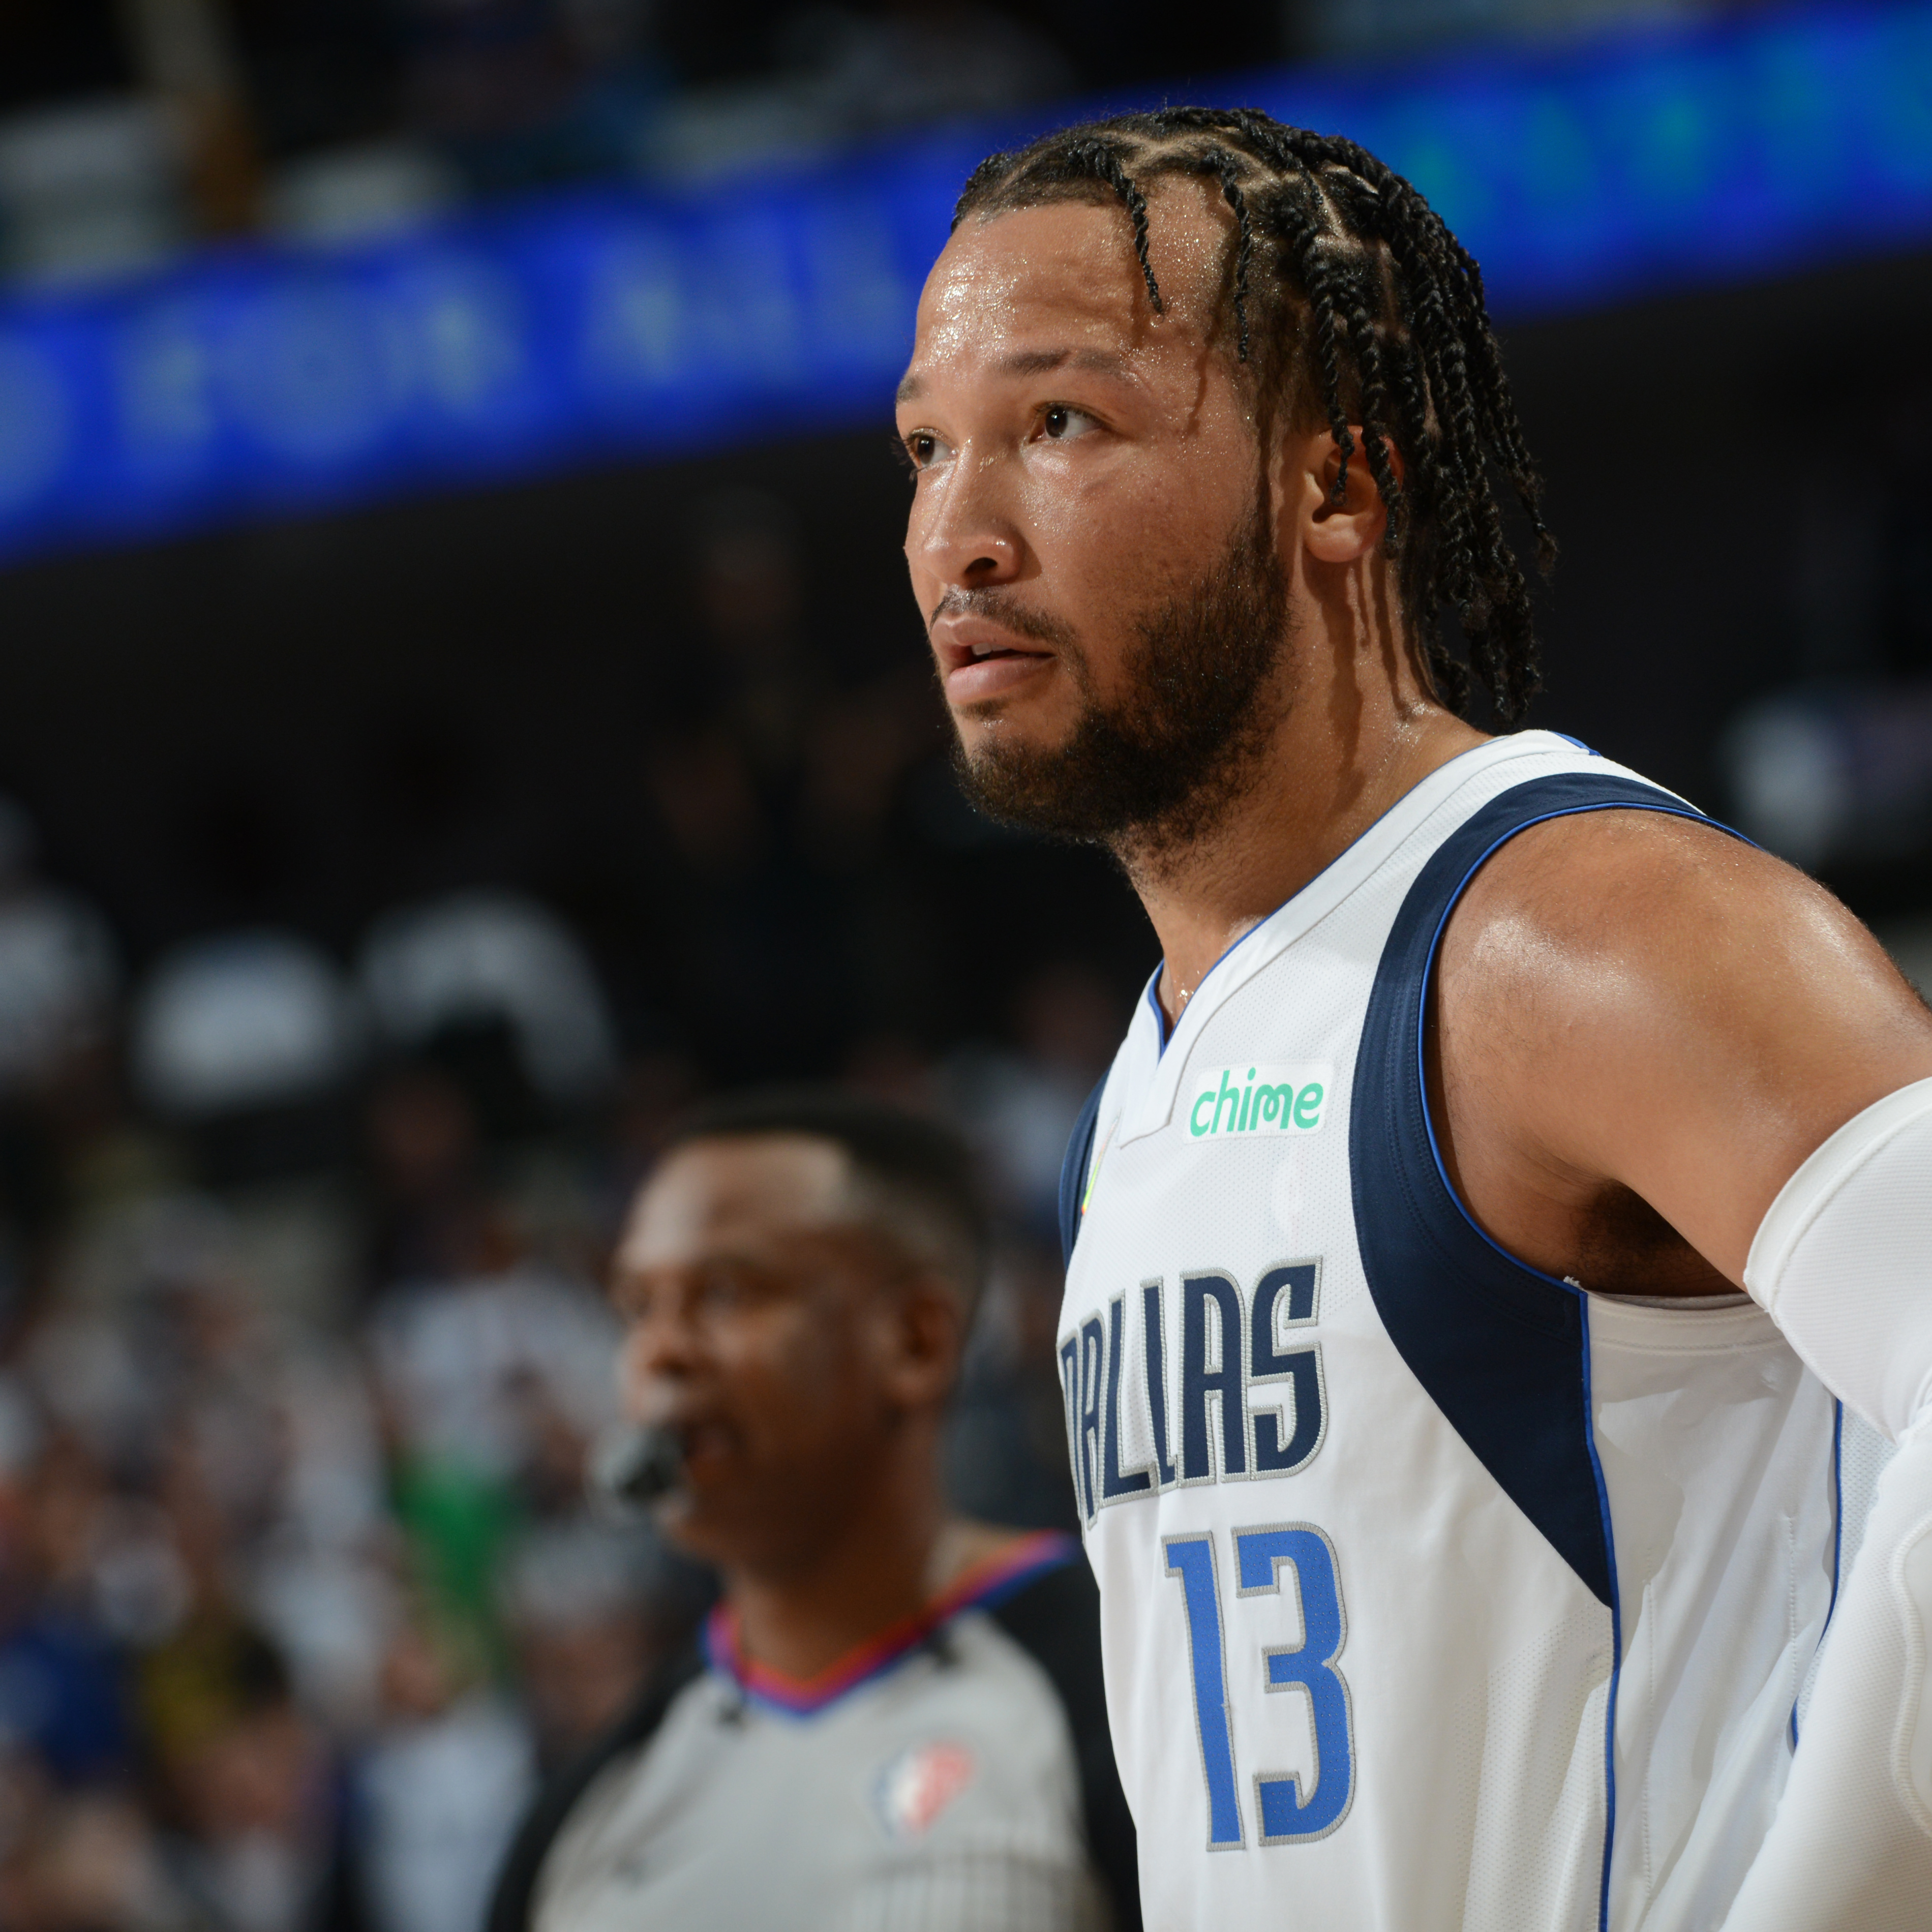 3 Instant Reactions After Jalen Brunson’s Reported 4-Year, $110M Contract With Knicks